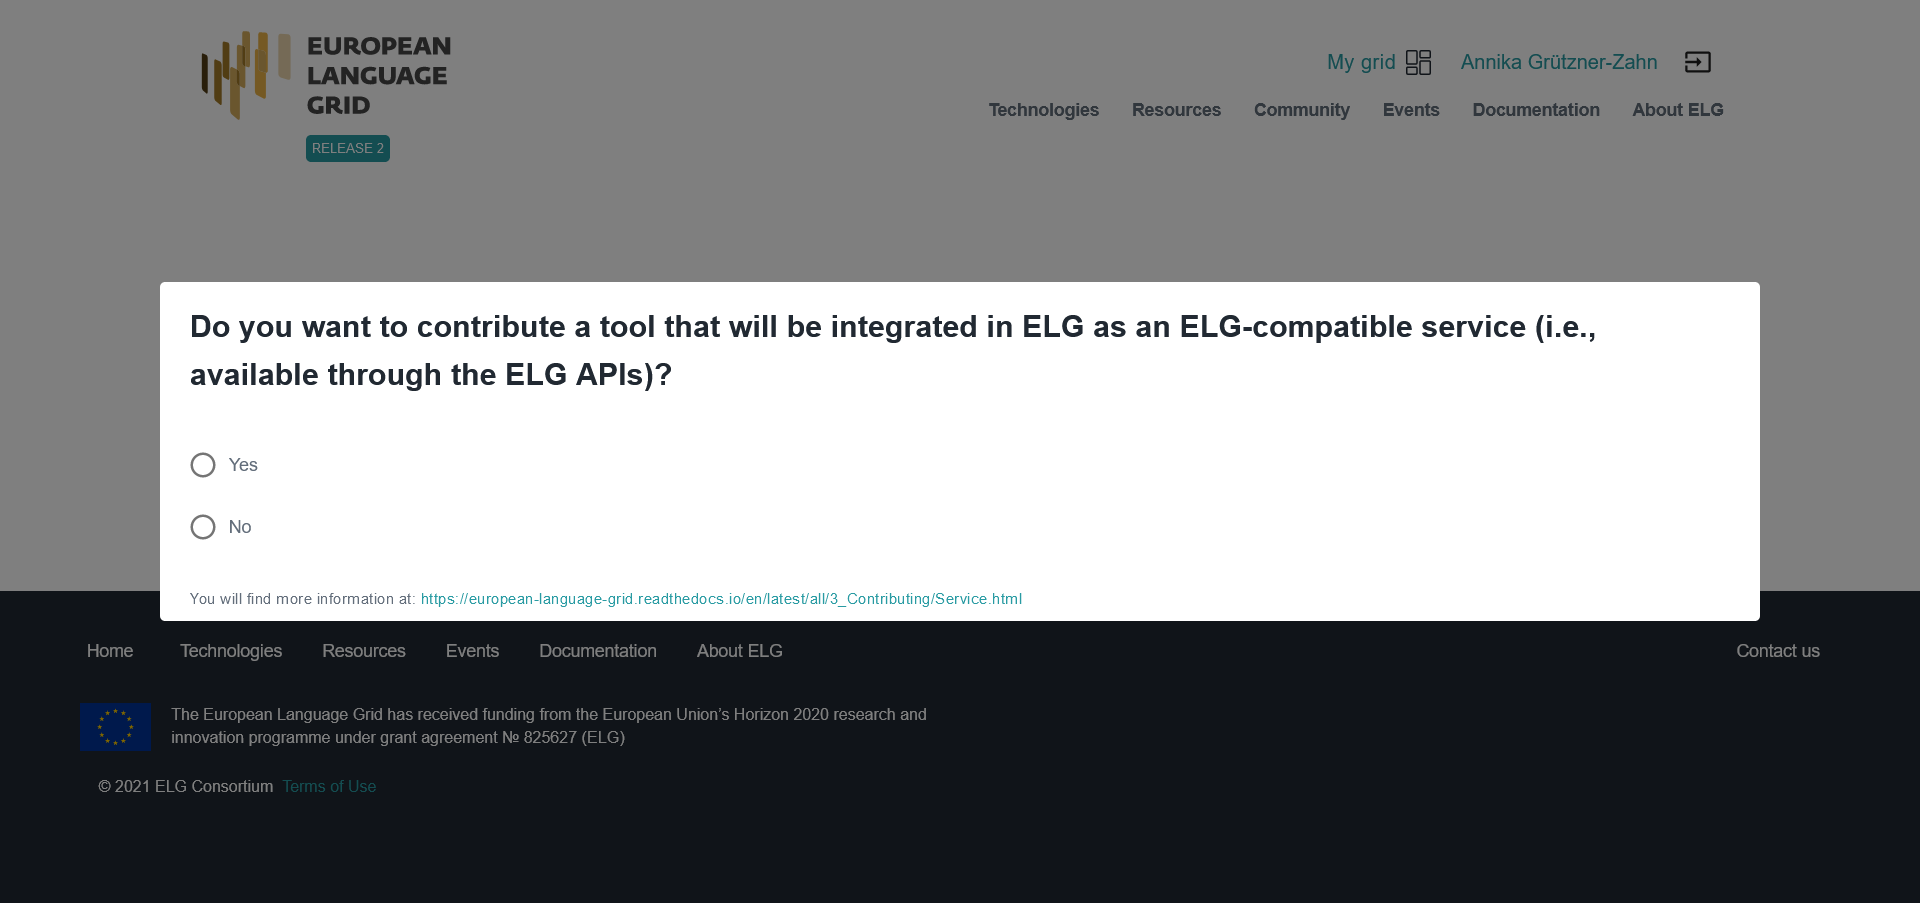 Select "yes" for ELG-compatible services